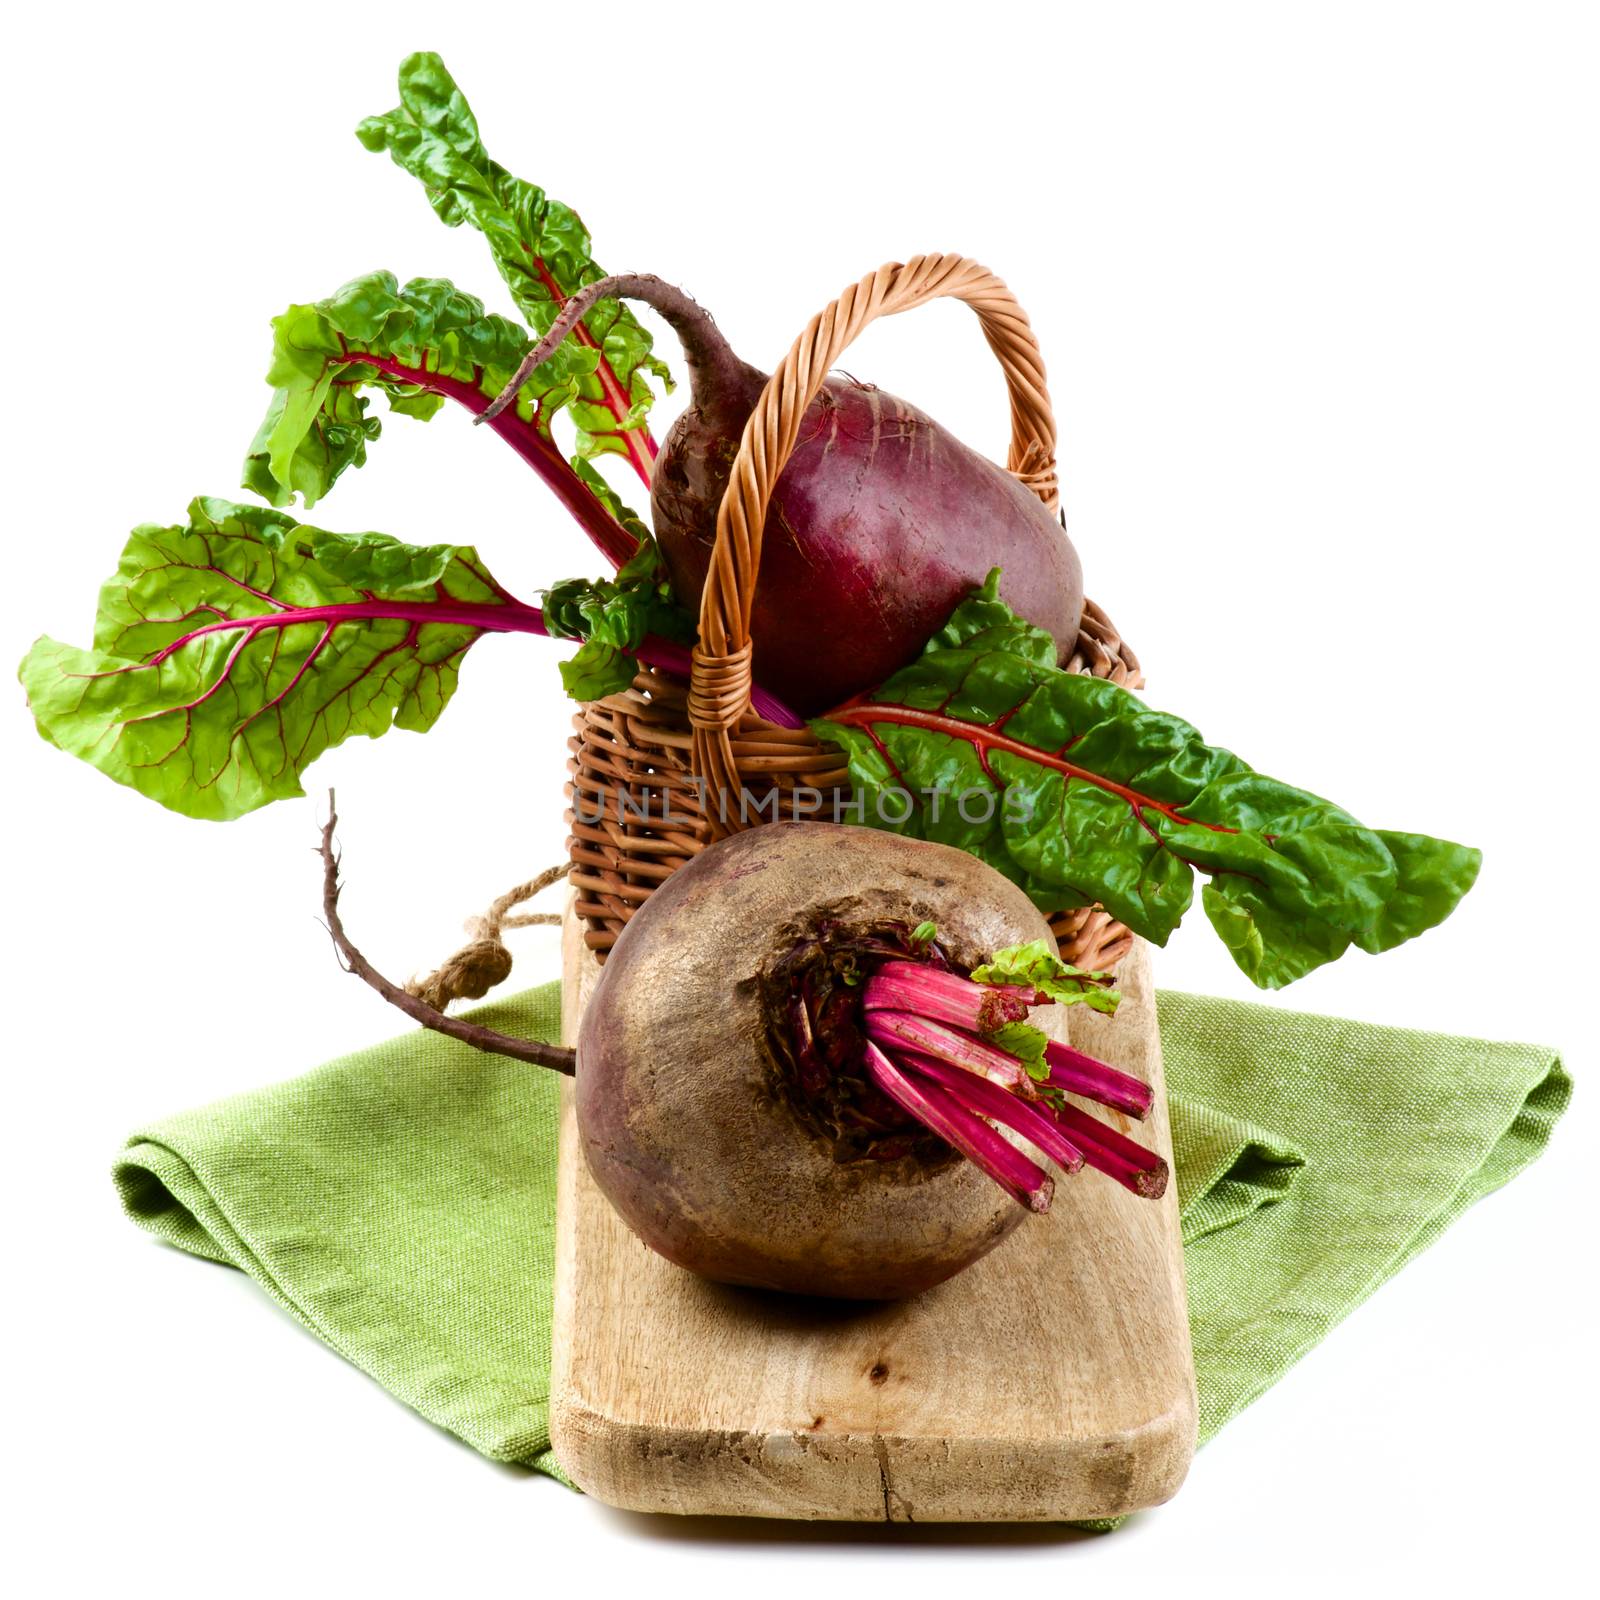 Two Fresh Raw Organic Beet Roots with Green Beet Tops in Wicker Basket on Wooden Board and Napkin isolated on White background